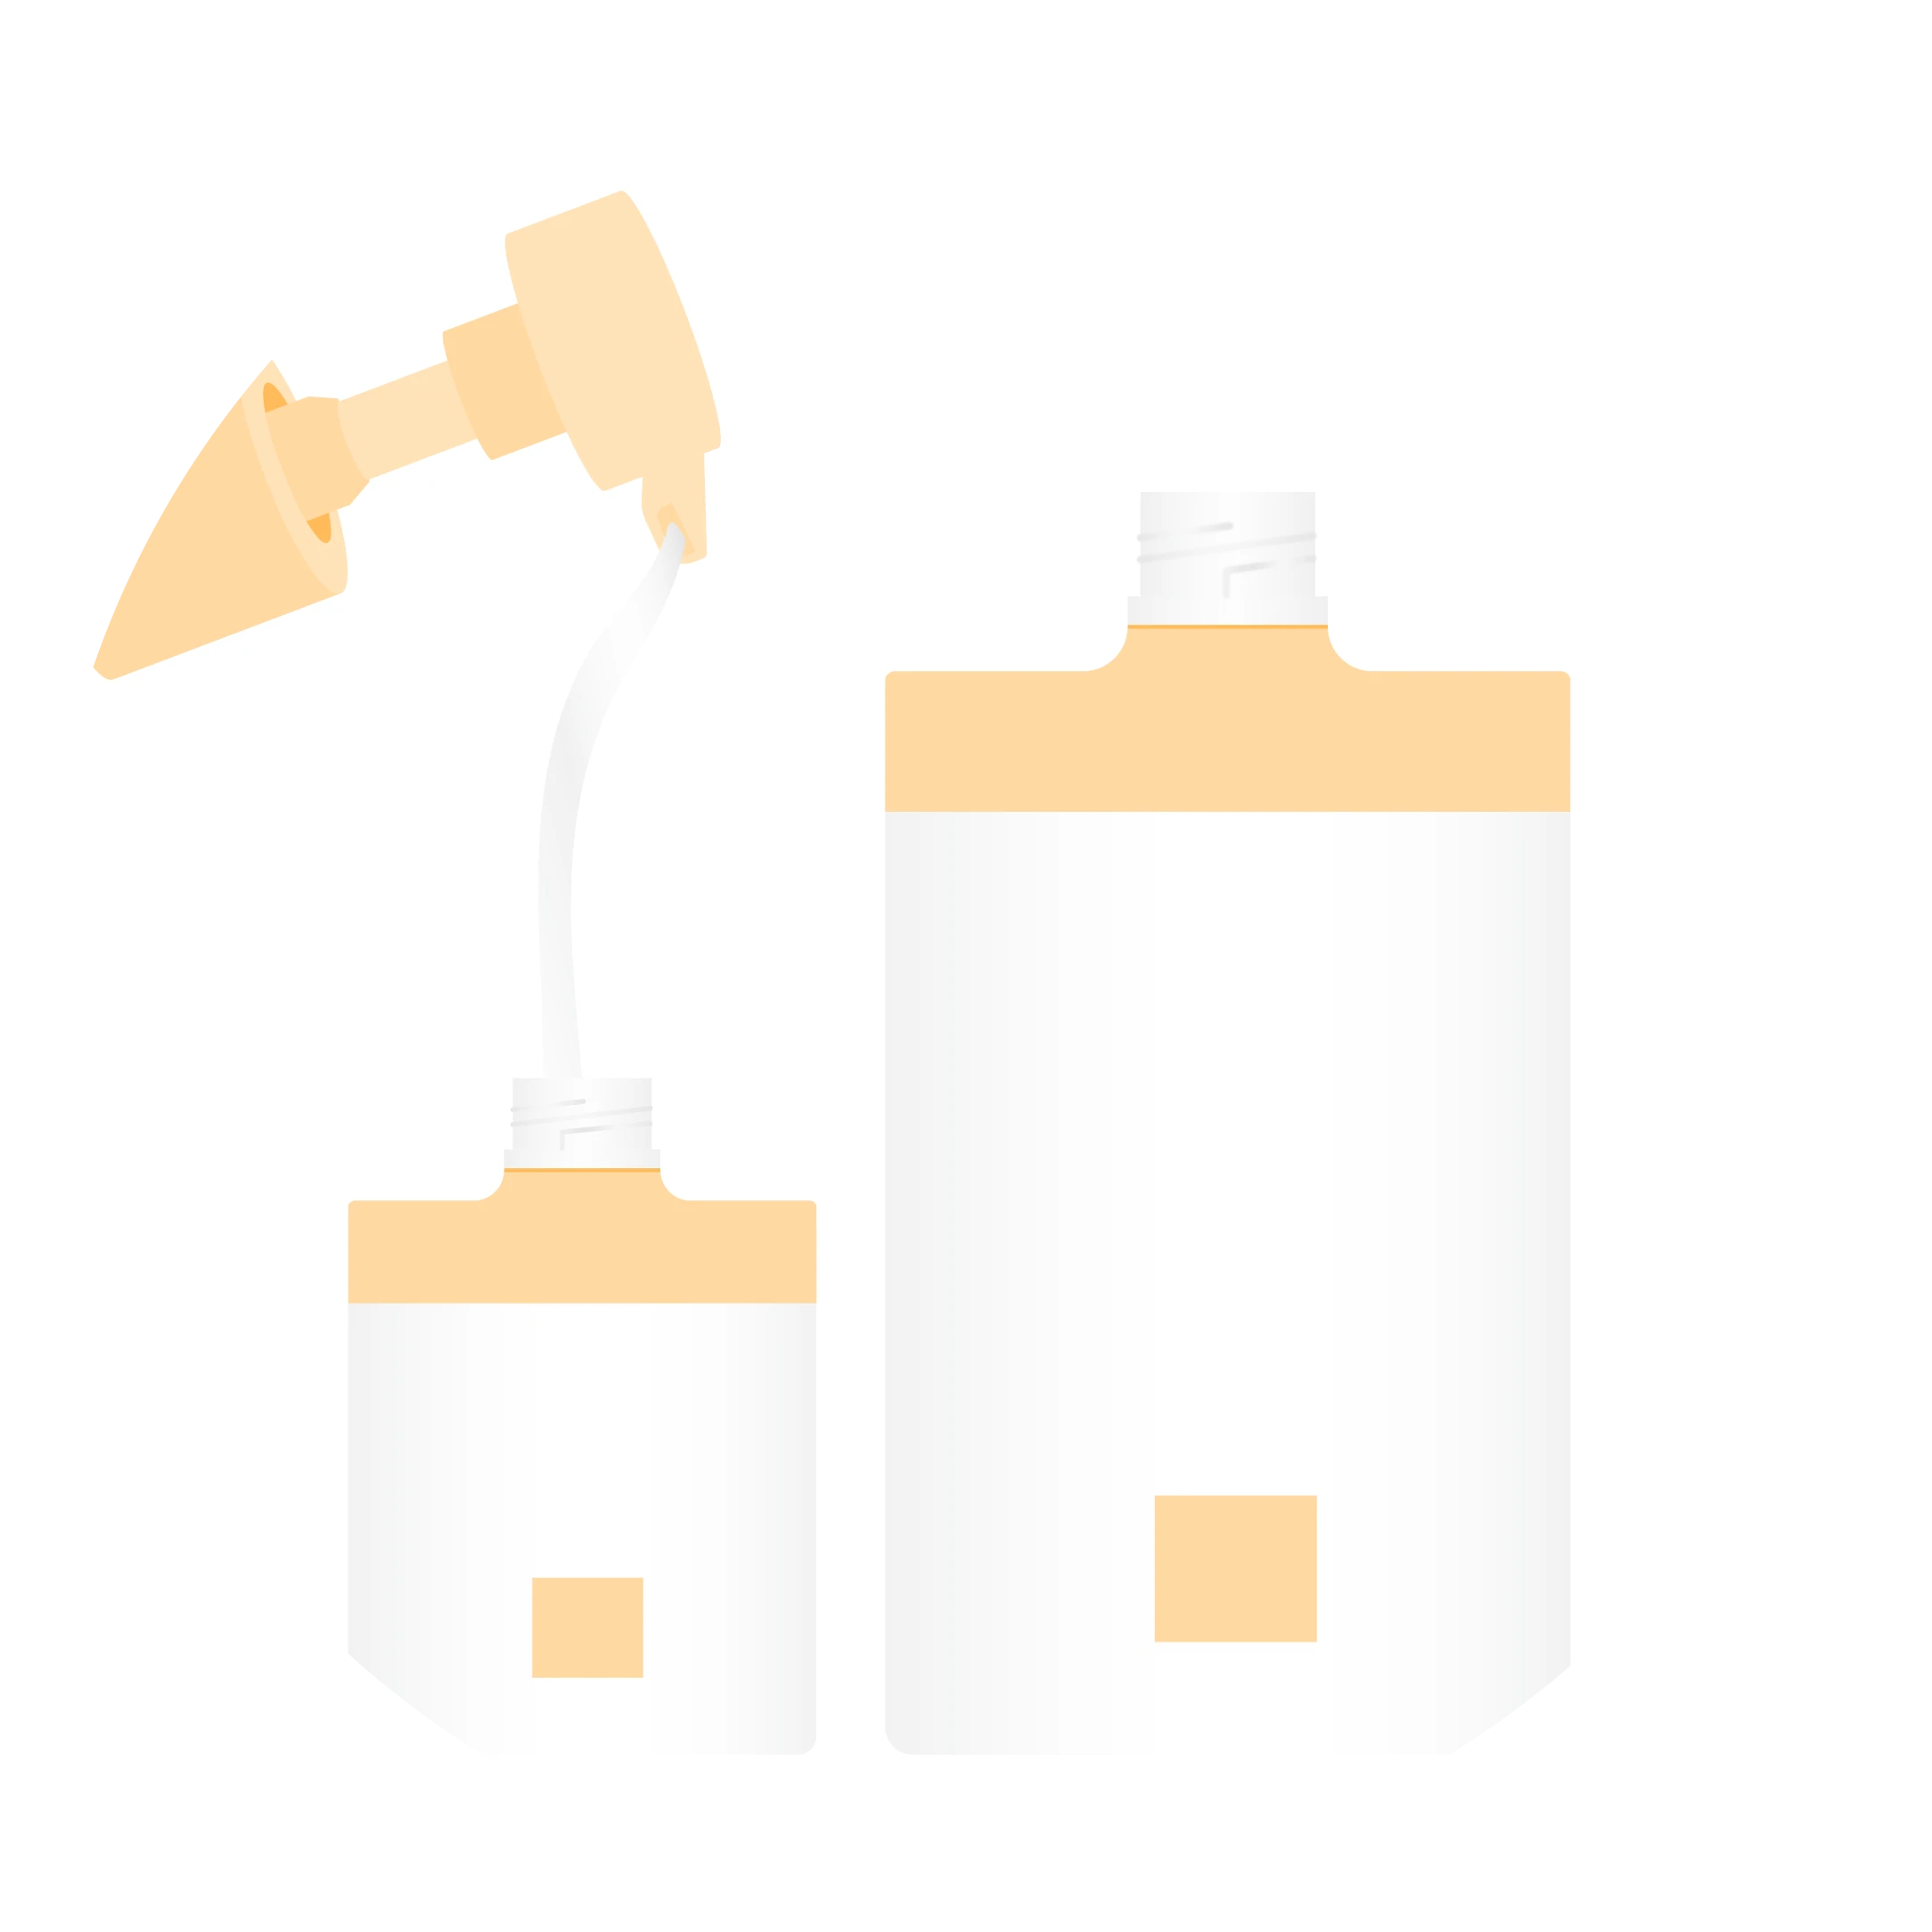 Illustration of two bottles being refilled